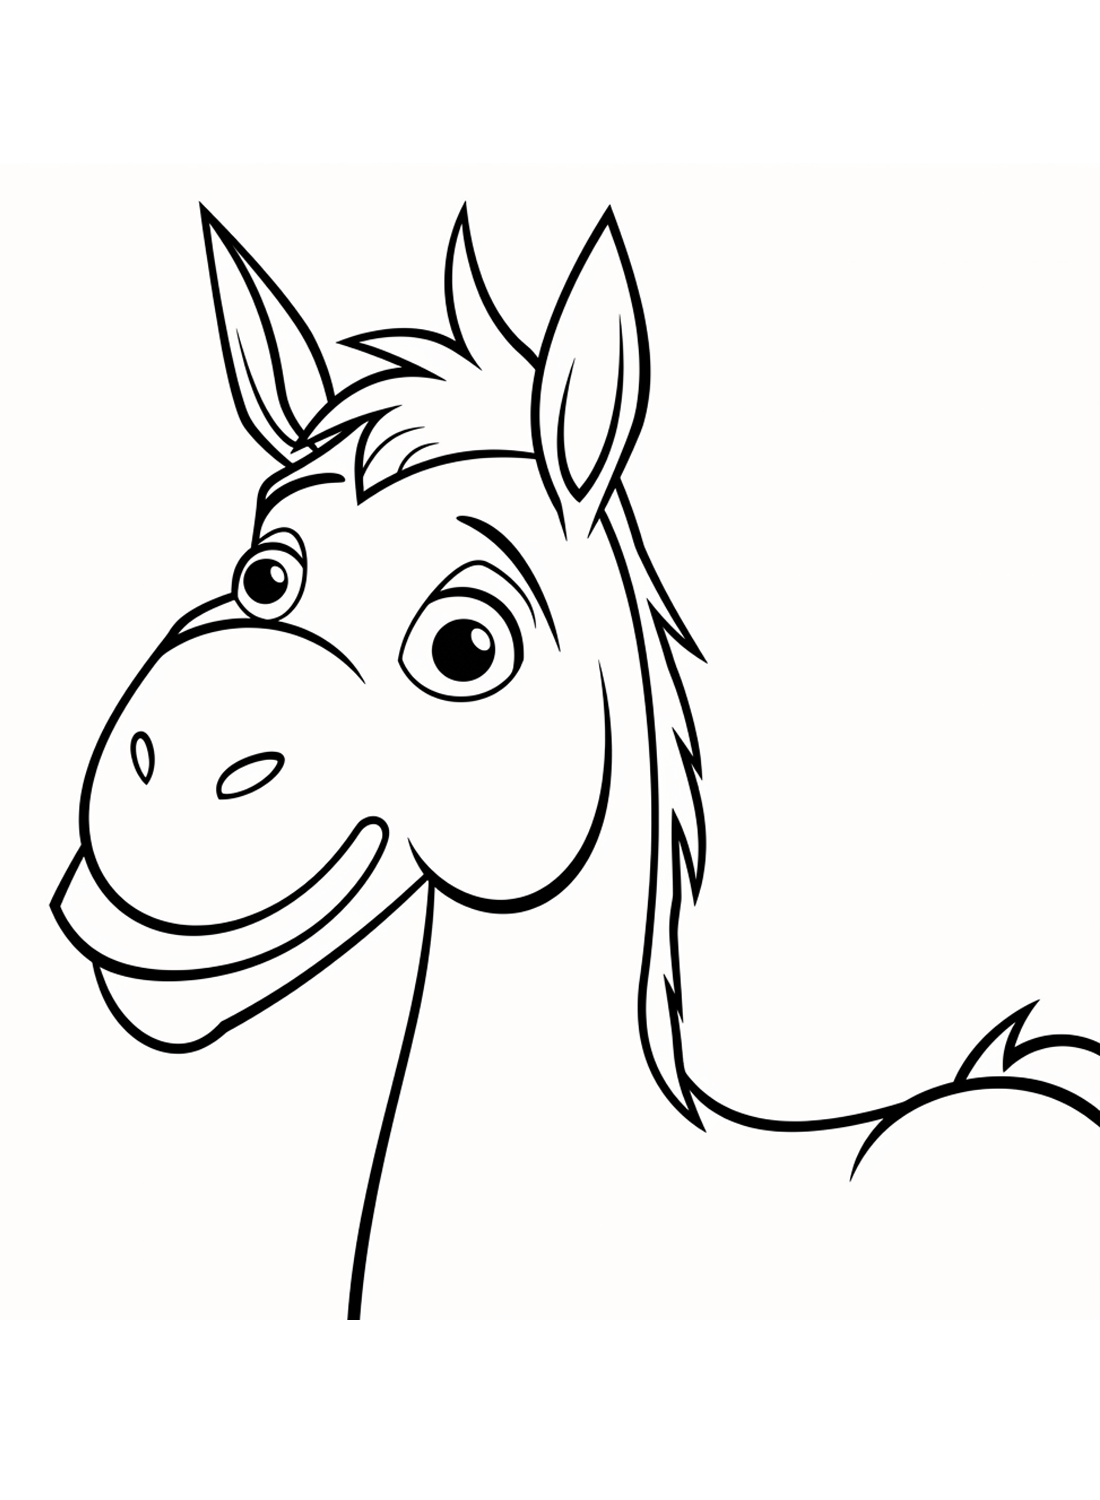 The Donkey Coloring Page